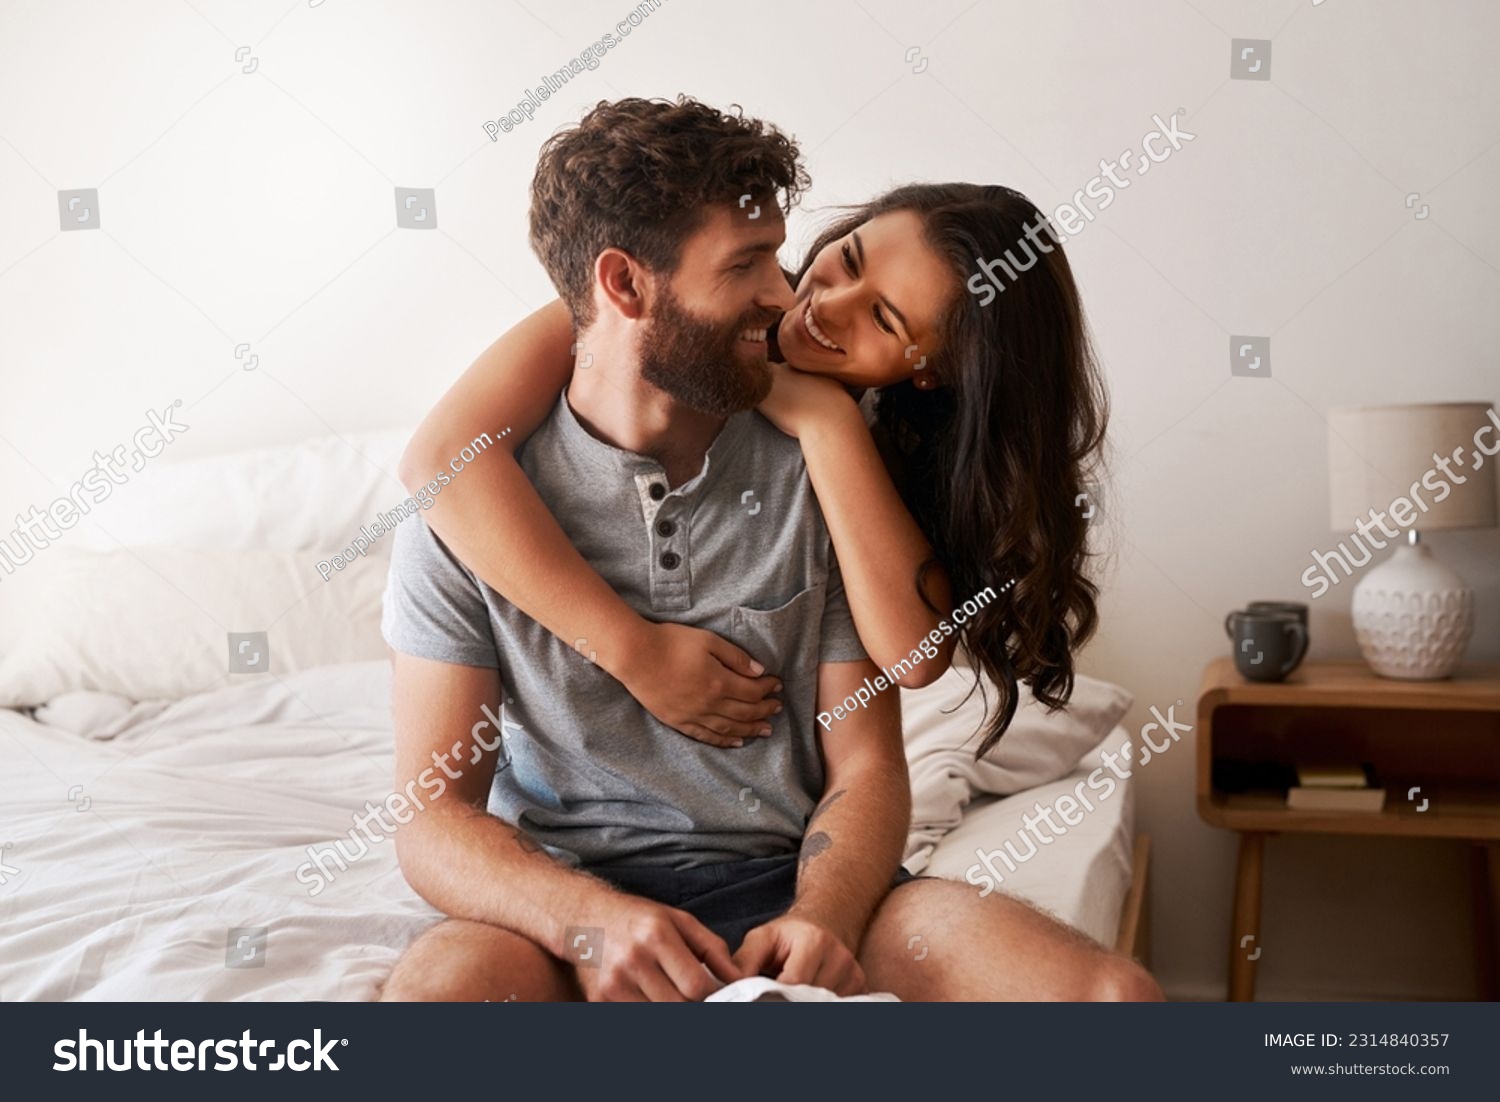 Love, home bedroom and happy couple hug, bond and spending relax morning together, bonding and smile. Happiness, marriage or romantic people hugging with affection, care and enjoy quality time on bed #2314840357